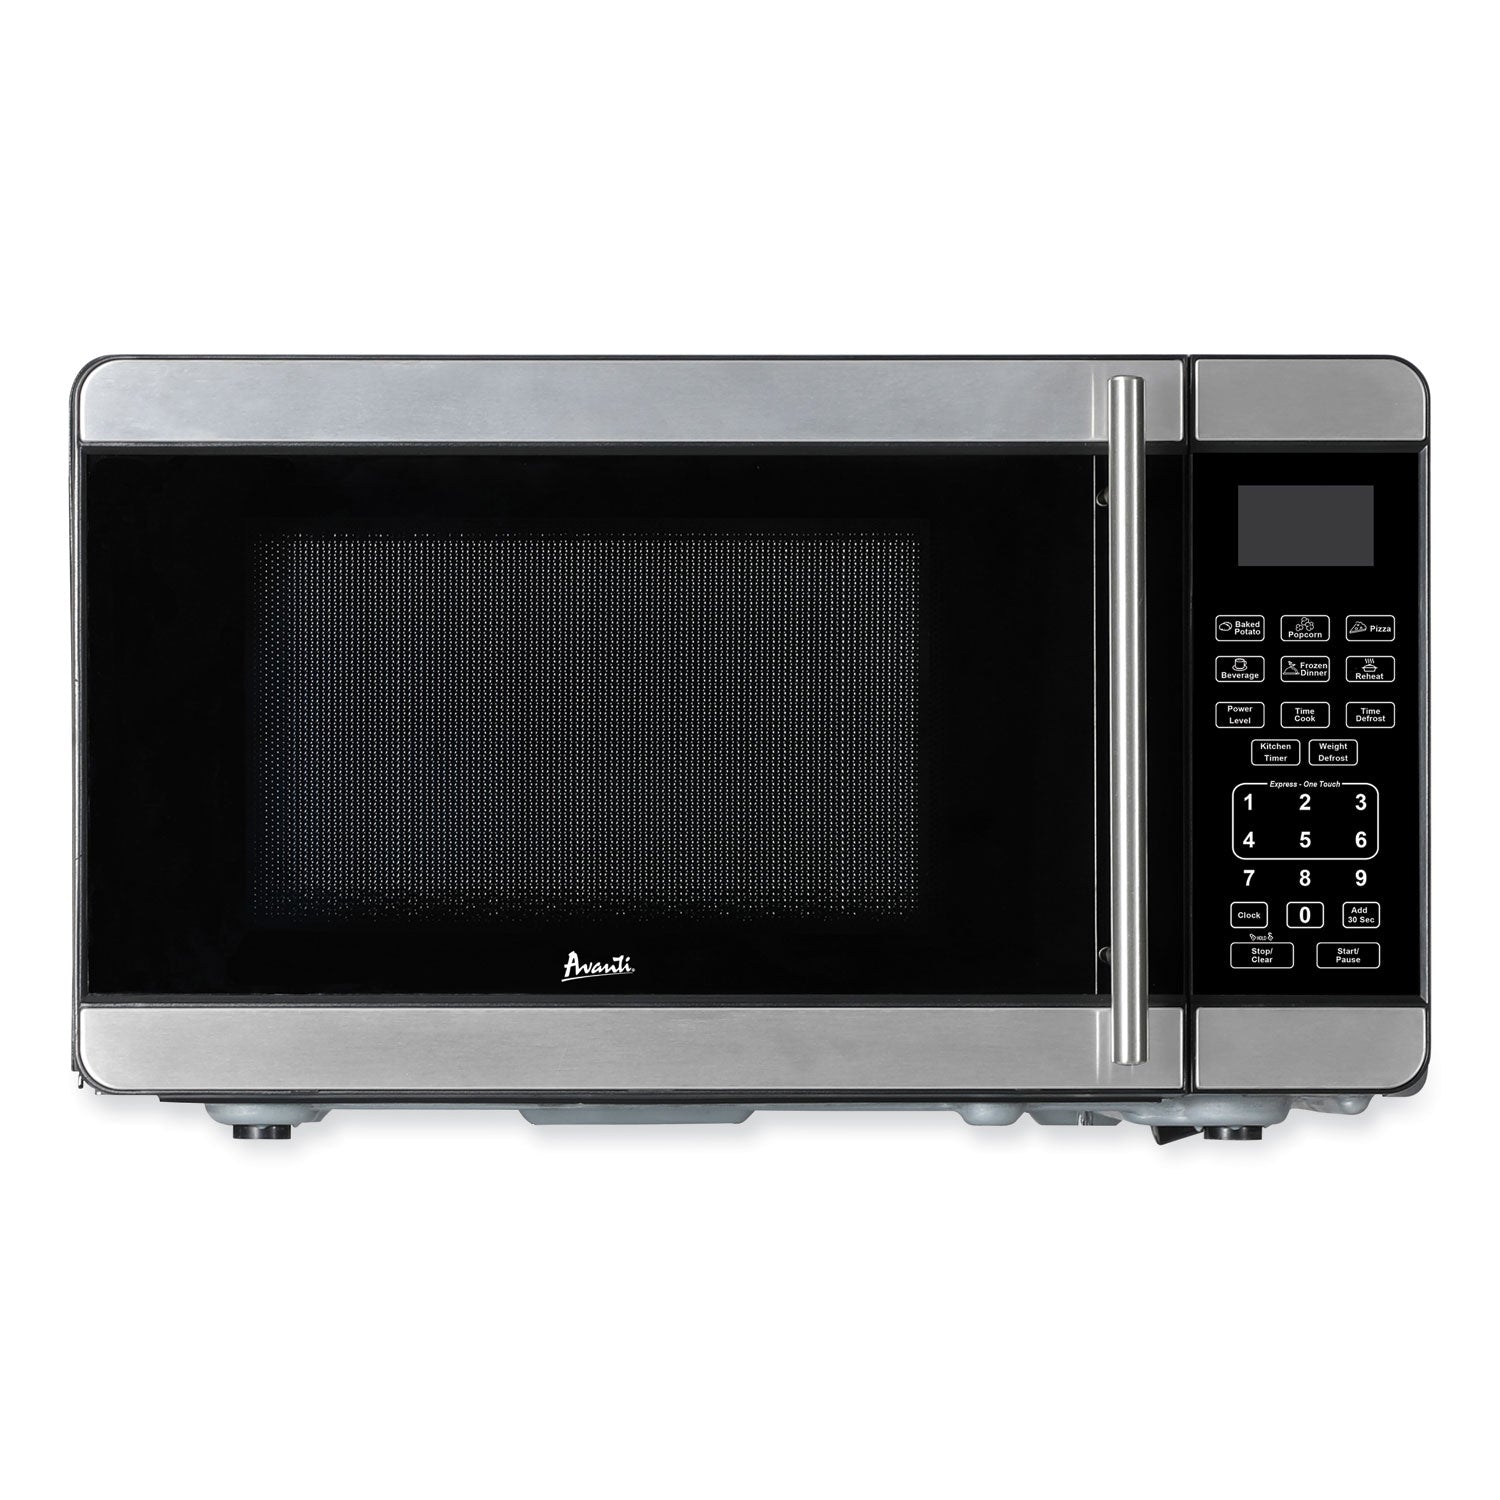 07-cubic-foot-microwave-oven-700-watts-stainless-steel-black_avamt7v3s - 2